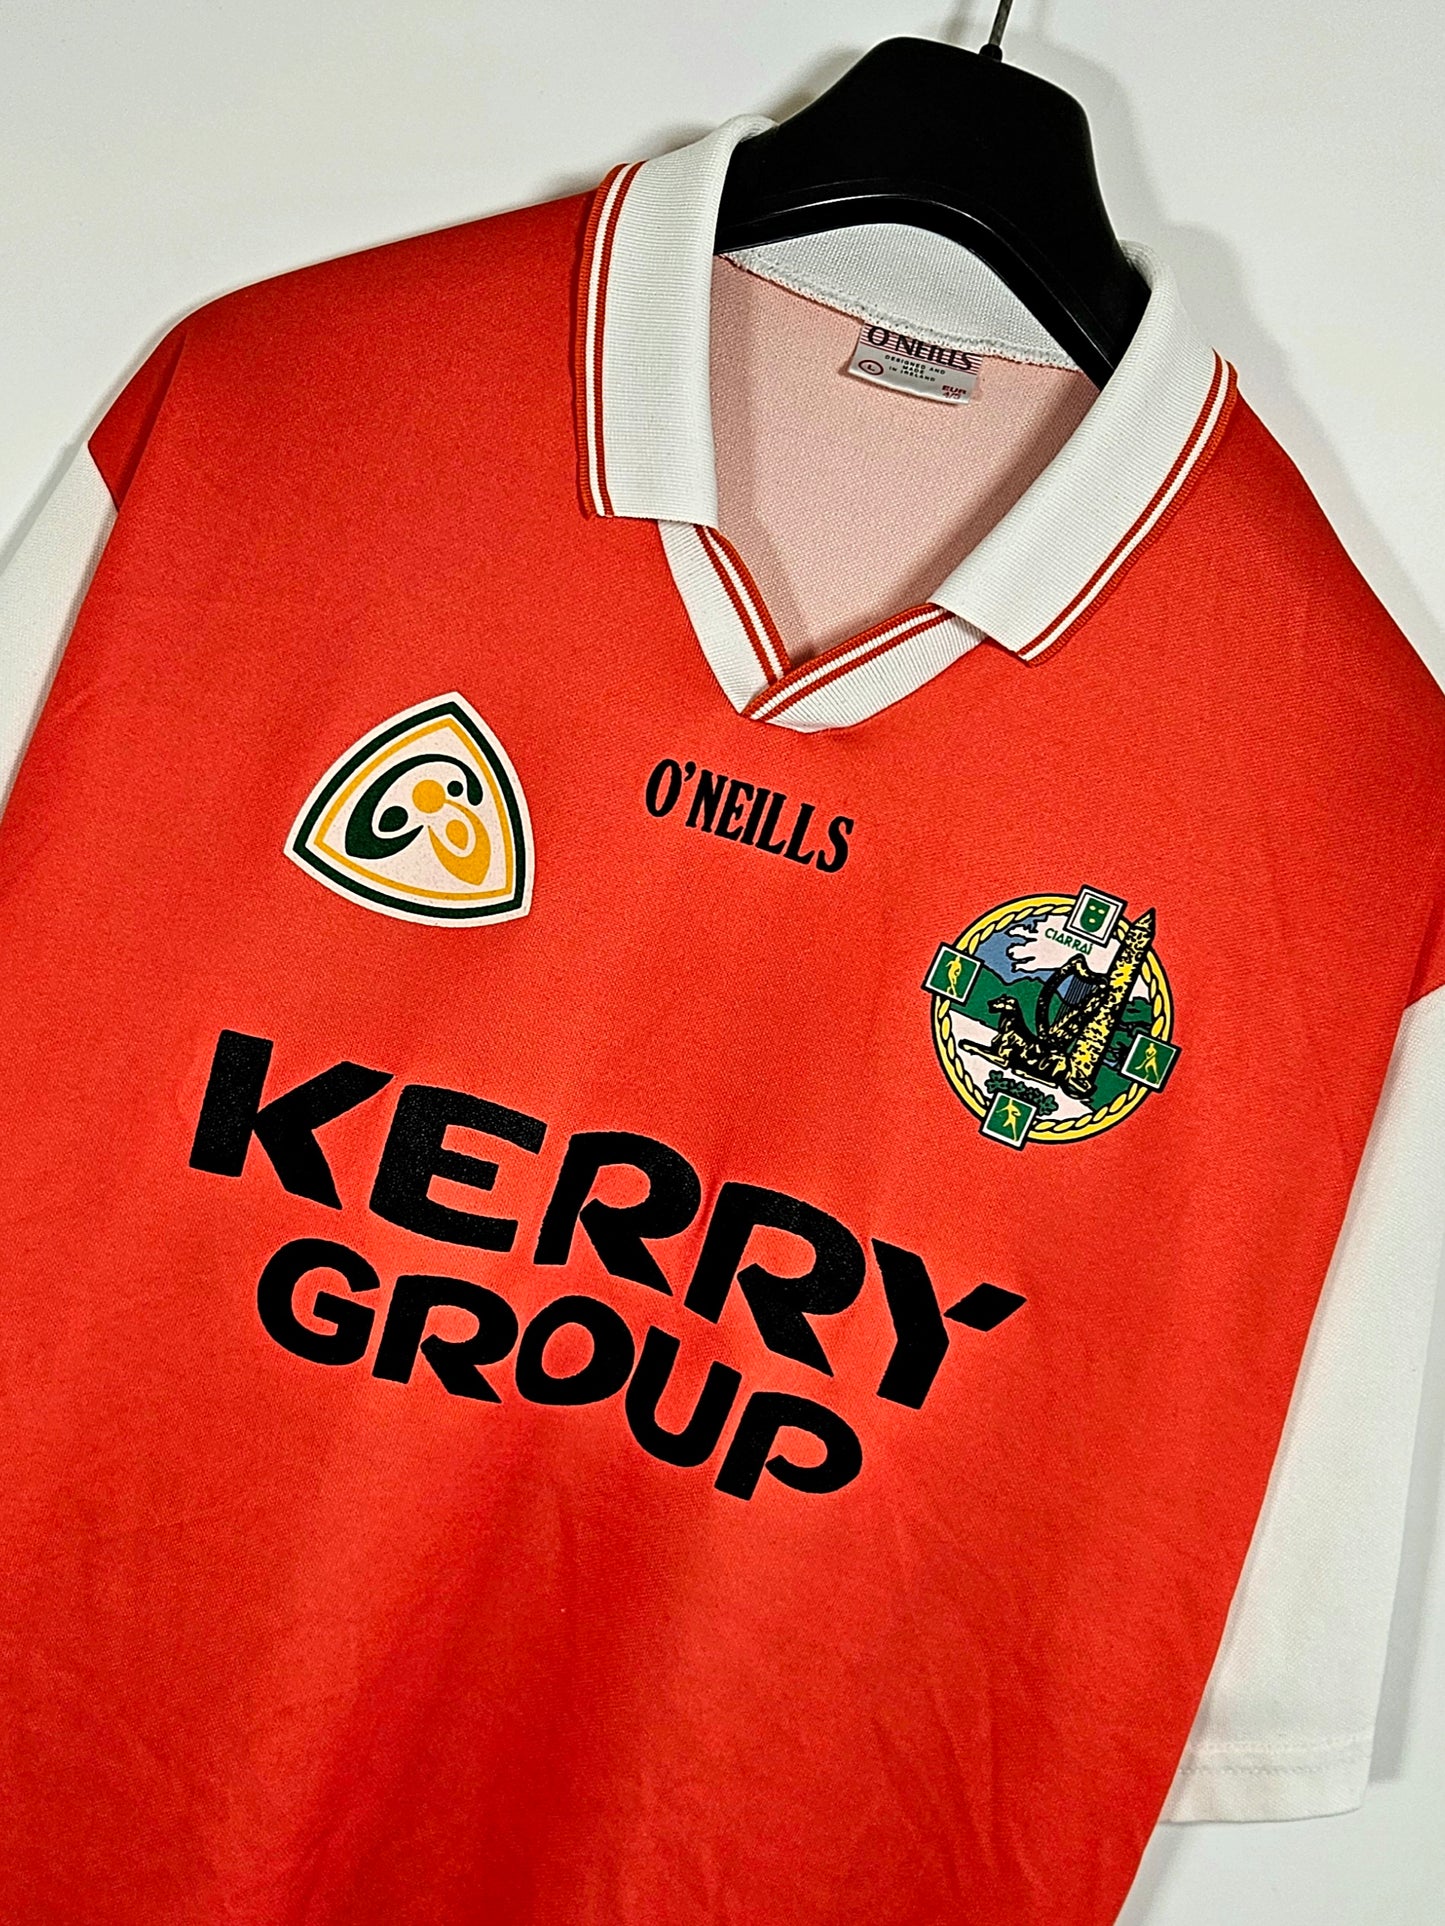 Kerry Training Jersey 2000s (L) - Player Issued